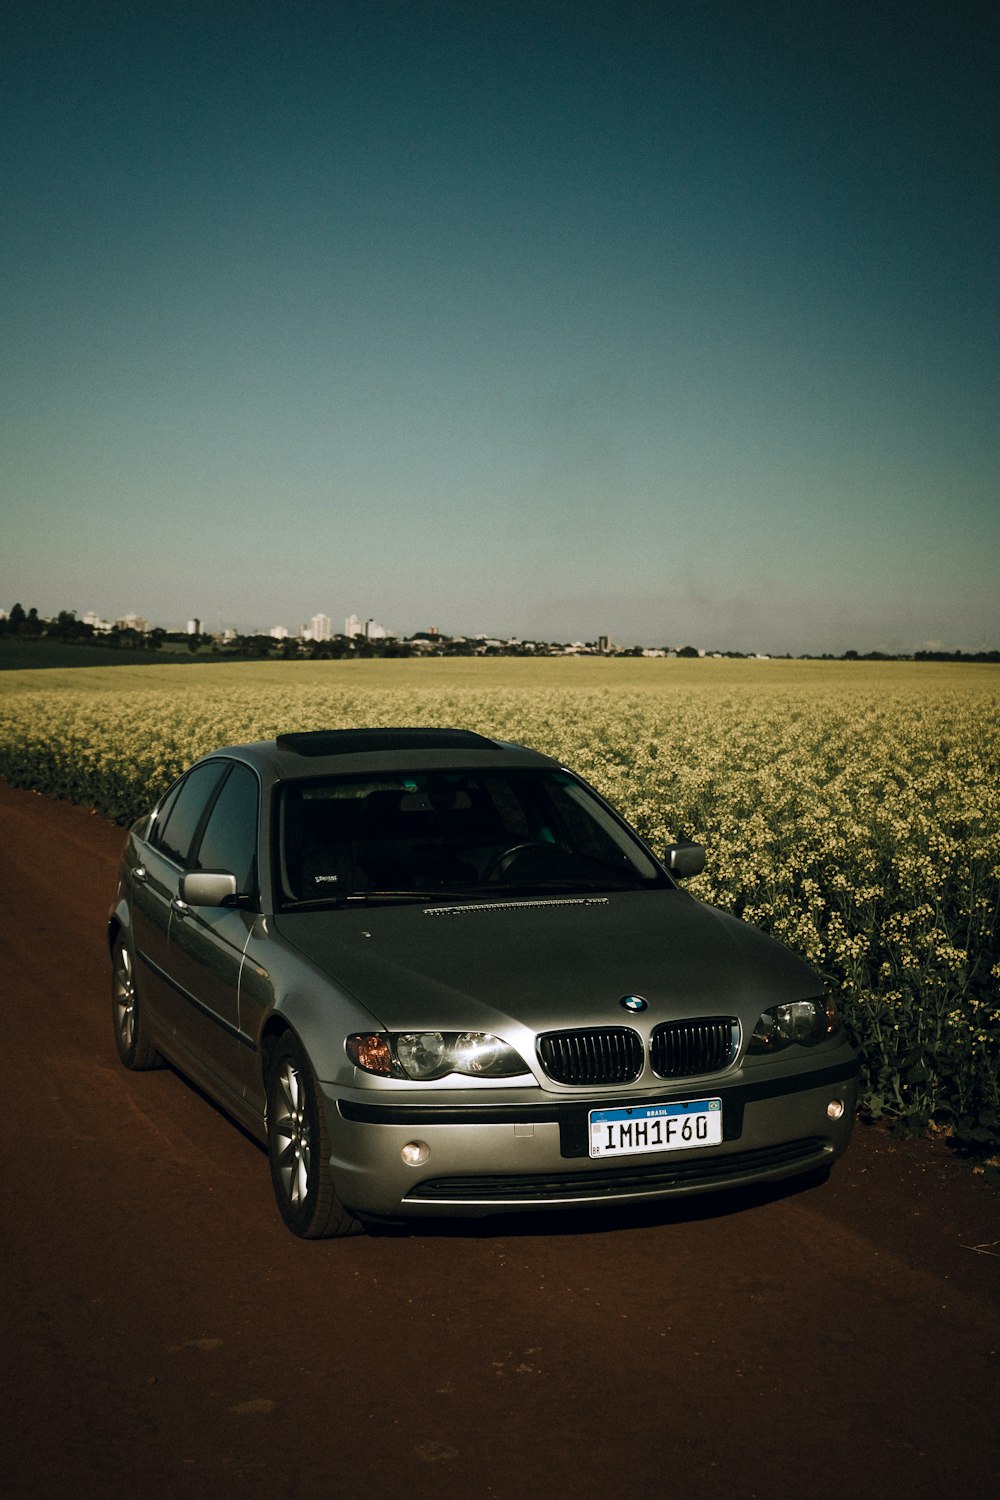 black audi a 4 on yellow flower field during daytime